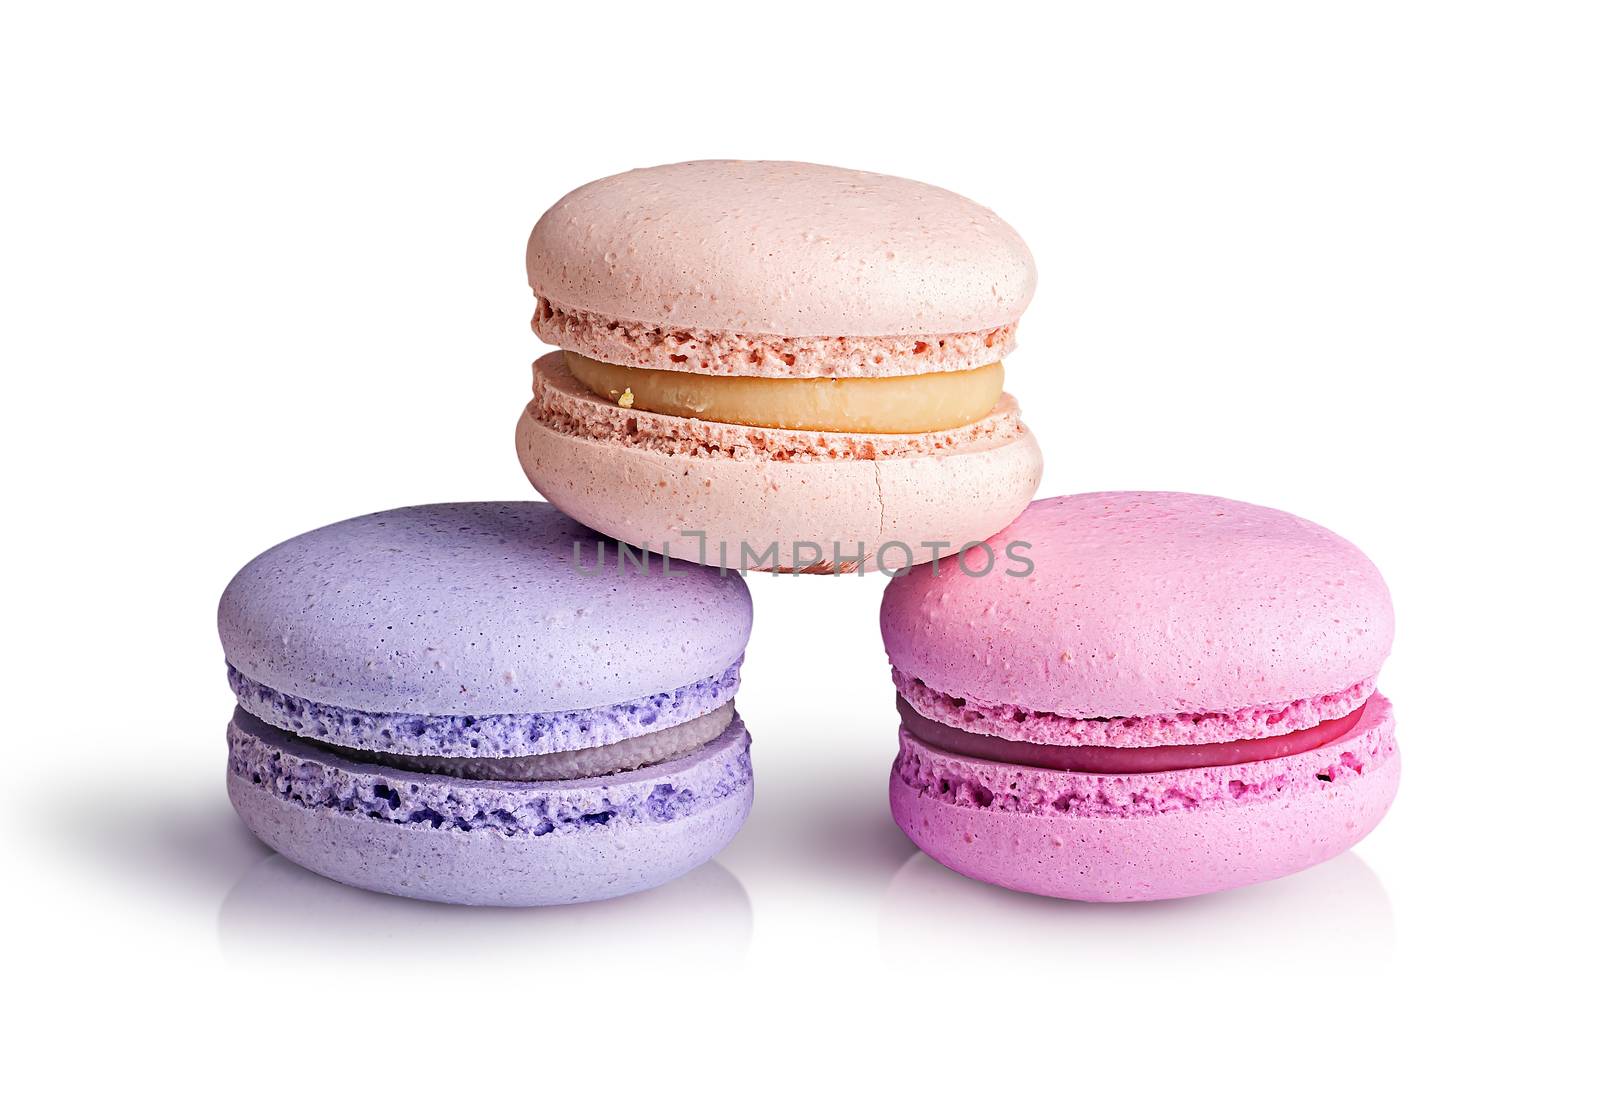 Three macaroons stacked in a pyramid by Cipariss